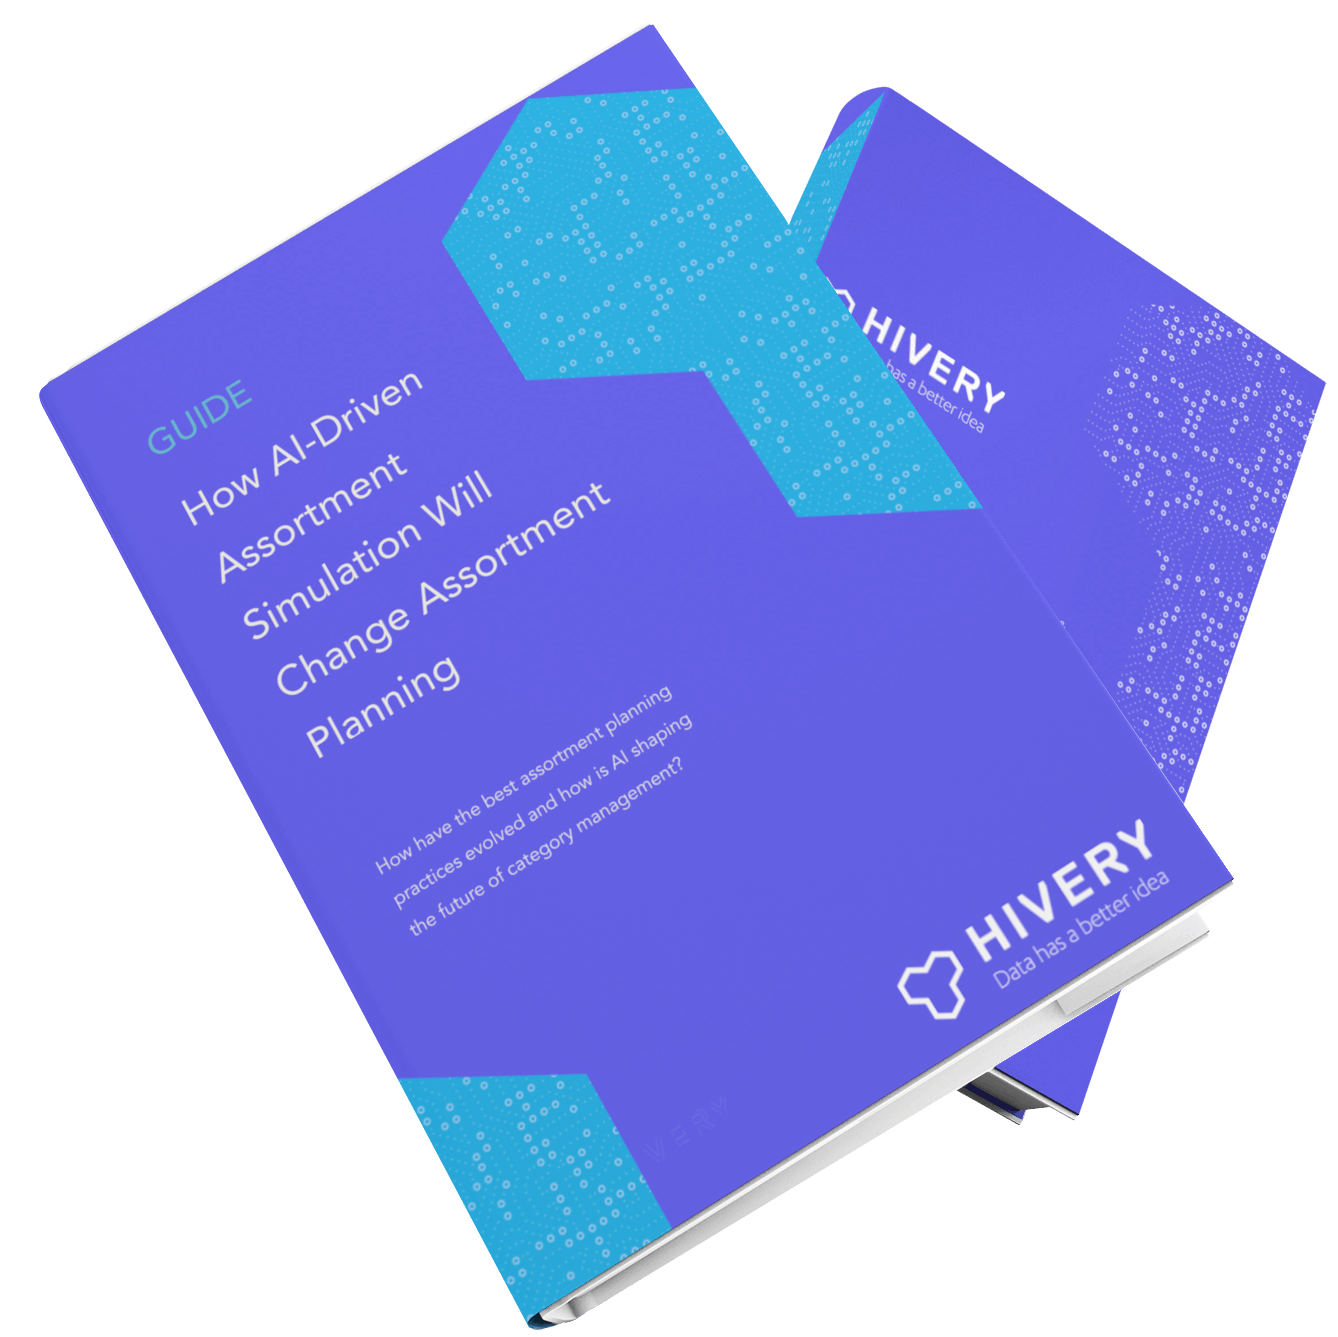 Guide: How AI-Driven Assortment Simulation Will Change Assortment Planning